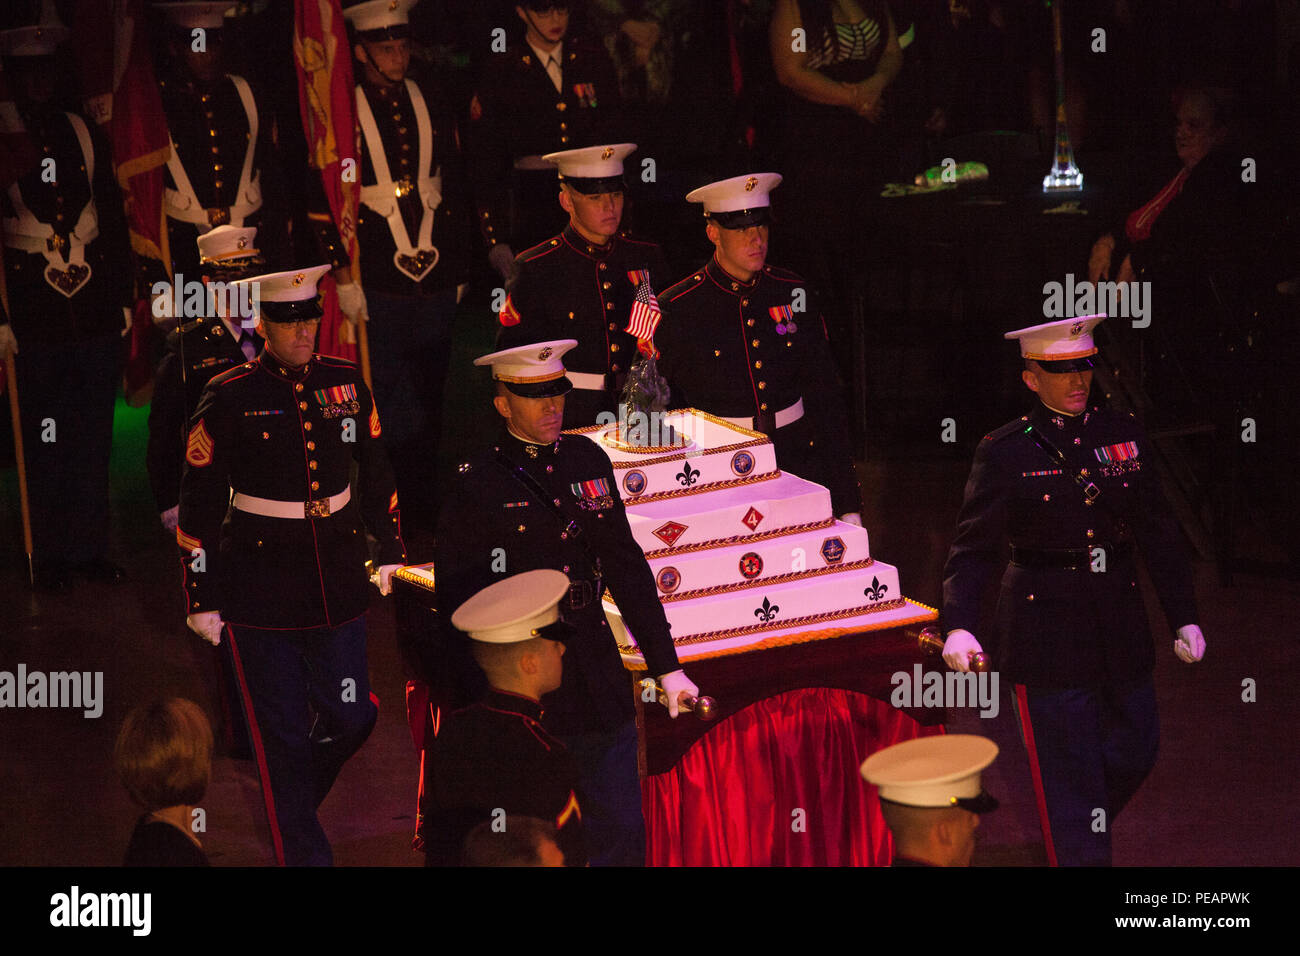 U.S. Marines with the Marine Forces Reserve and Marine Forces North, escort the birthday cake into position during the celebration of the 240th Marine Corps Birthday Ball at Mardi Gras World, New Orleans, La., Nov. 21, 2015. This year’s celebration honors those past, present, and future Marines throughout history and marks the 240th Marine Corps Birthday since its founding on Nov. 10, 1775. (U.S. Marine Corps photo by Kimberly Aguirre/Released) Stock Photo